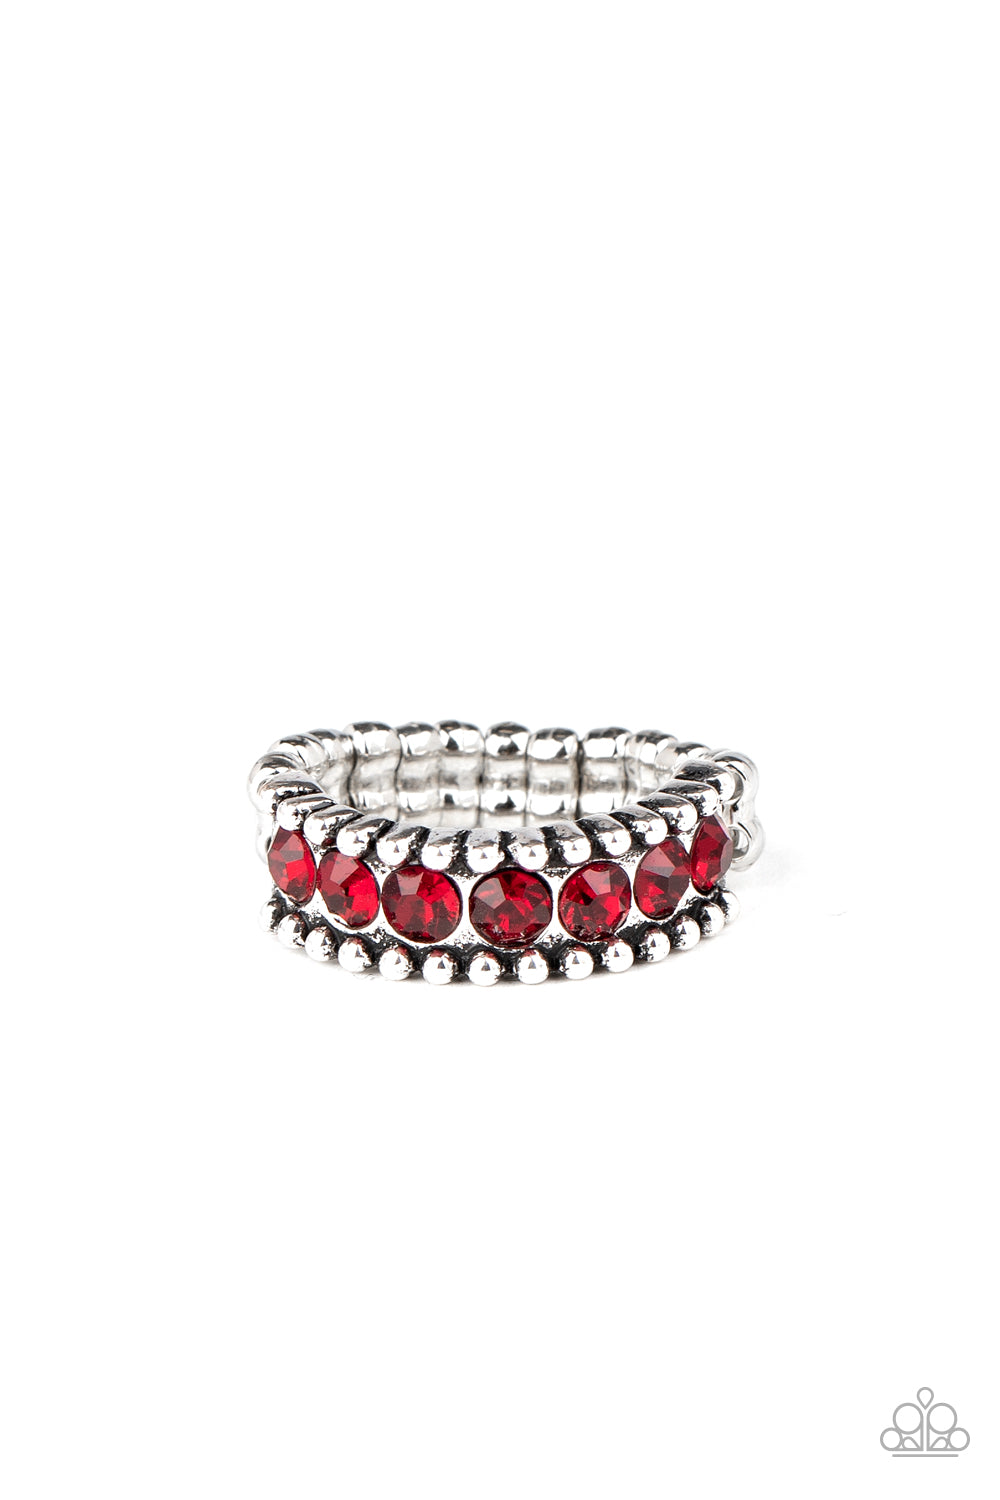 Paparazzi Rings - Crank It Up - Red